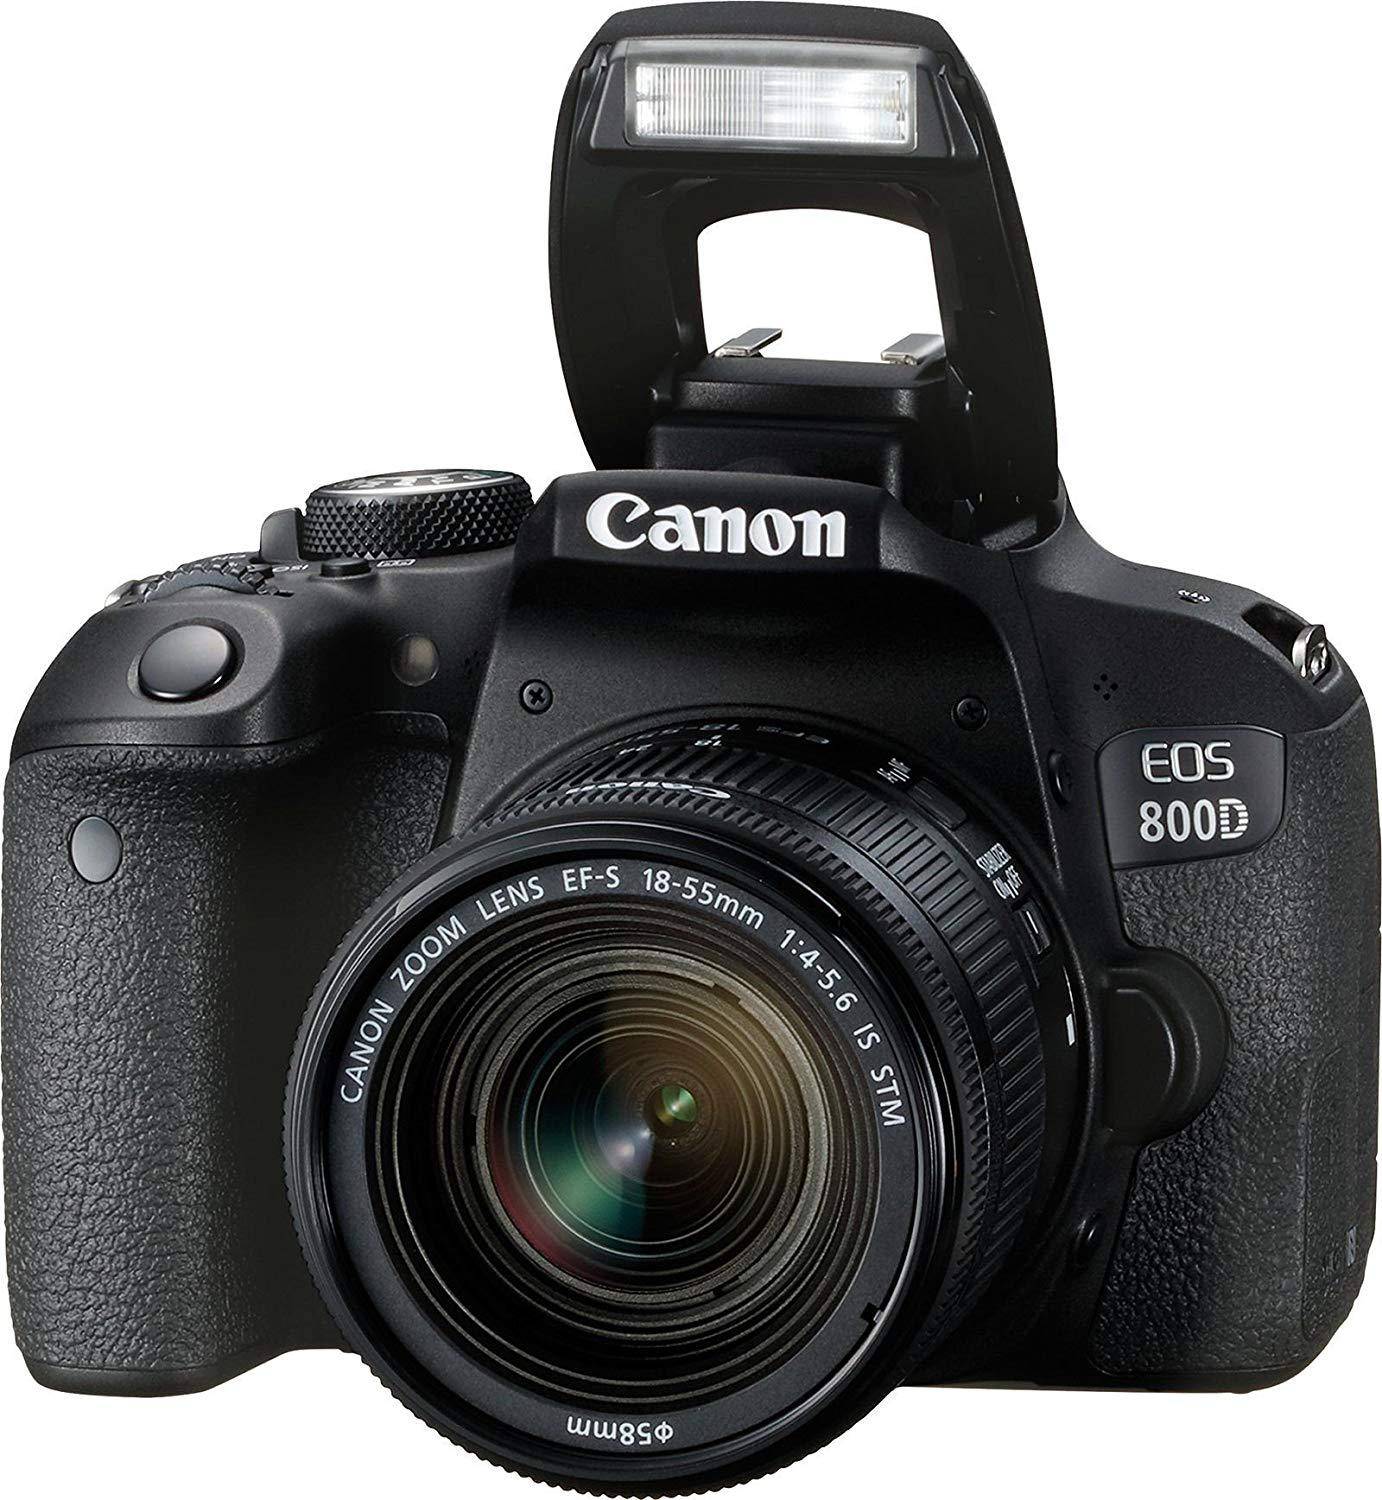 Buy Canon Eos 800d Dslr Cameras Online In India At Lowest Price Vplak